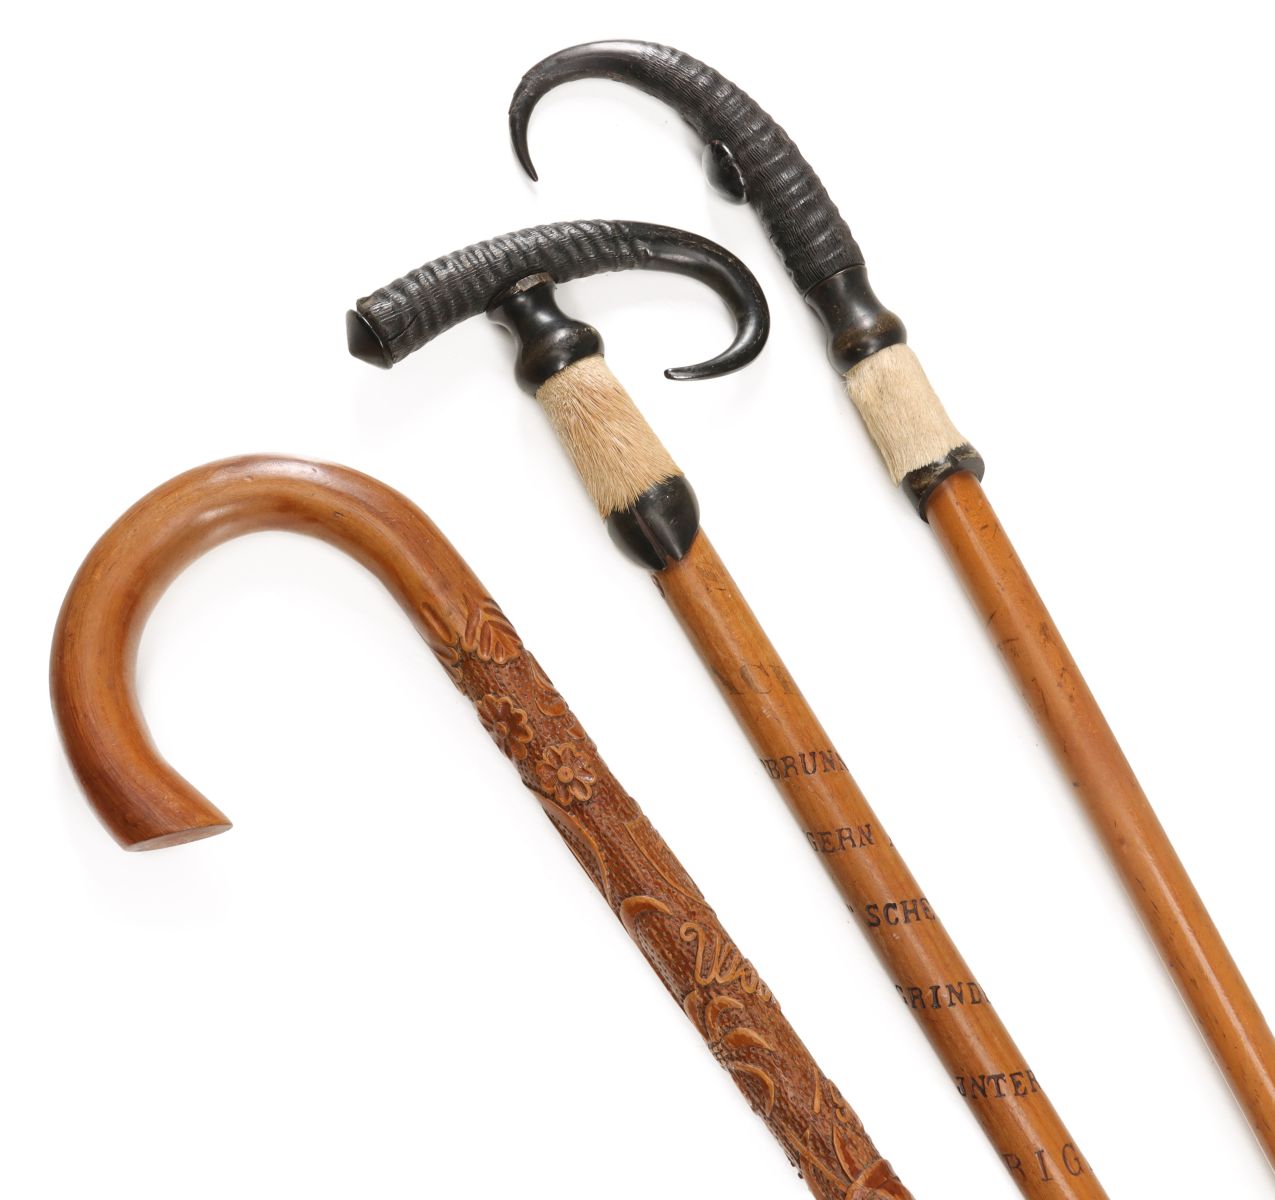 THREE EARLY 20TH CENTURY GERMAN CANES